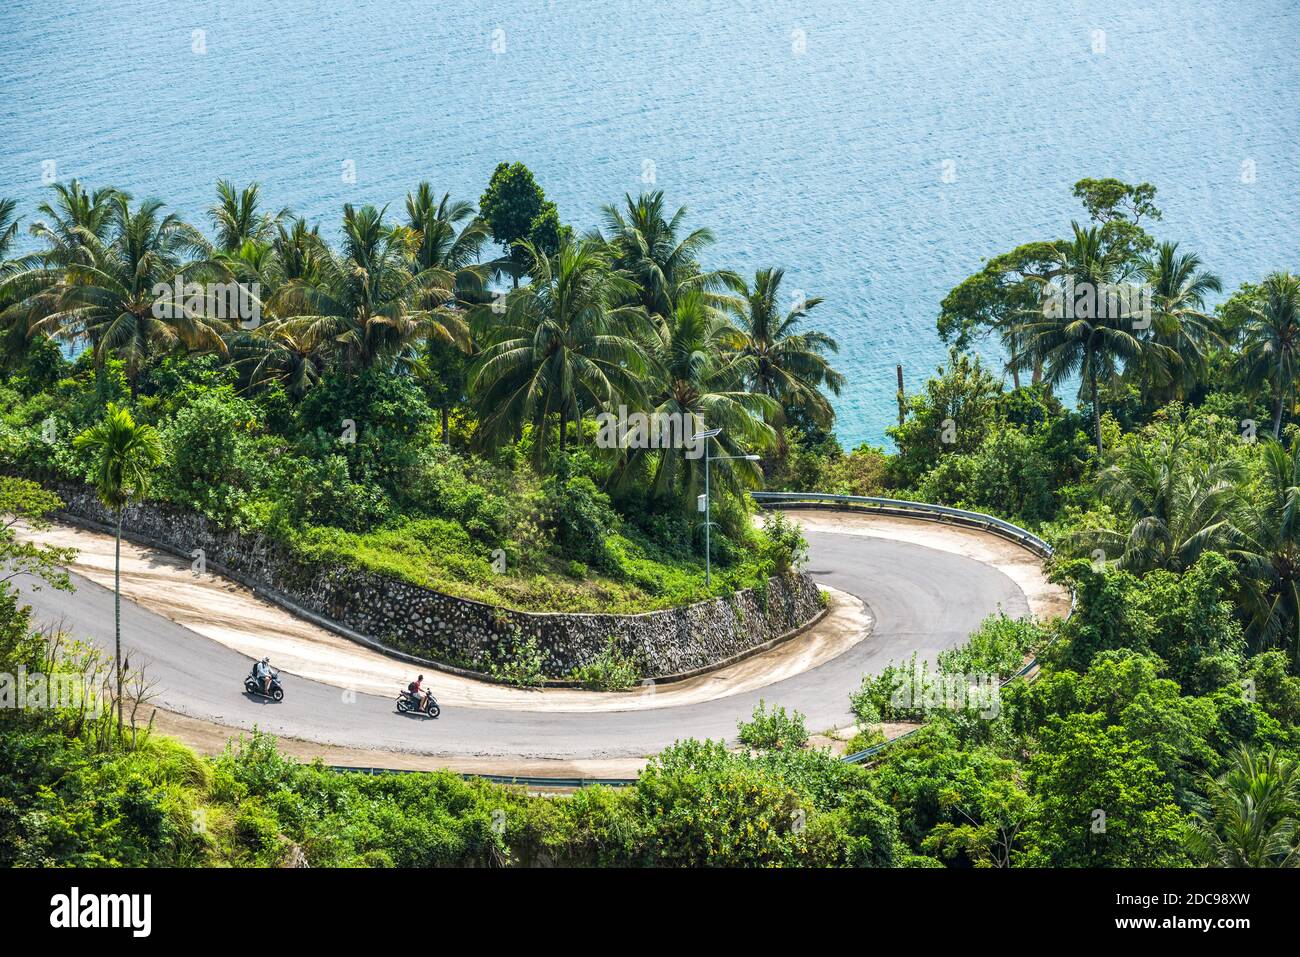 Tourists exploring Pulau Weh Island by Motorcycle, Aceh Province, Sumatra, Indonesia, Asia Stock Photo